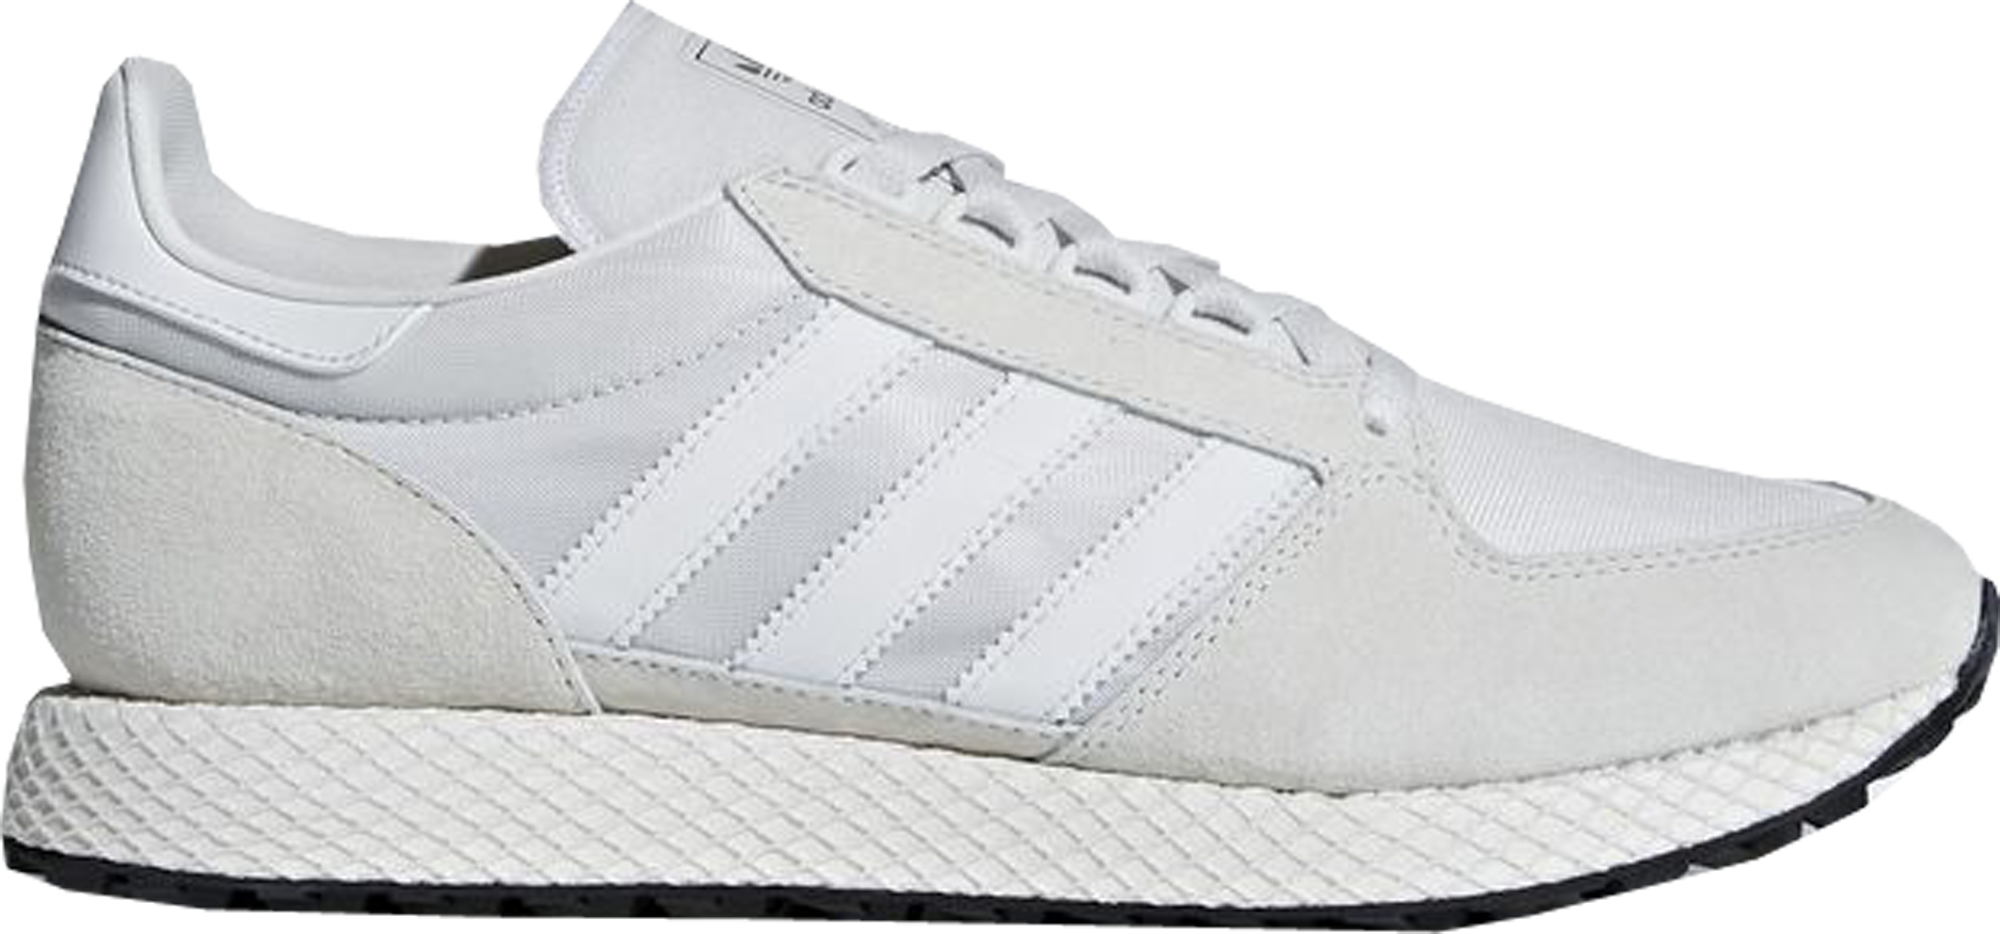 adidas forest grove white blue